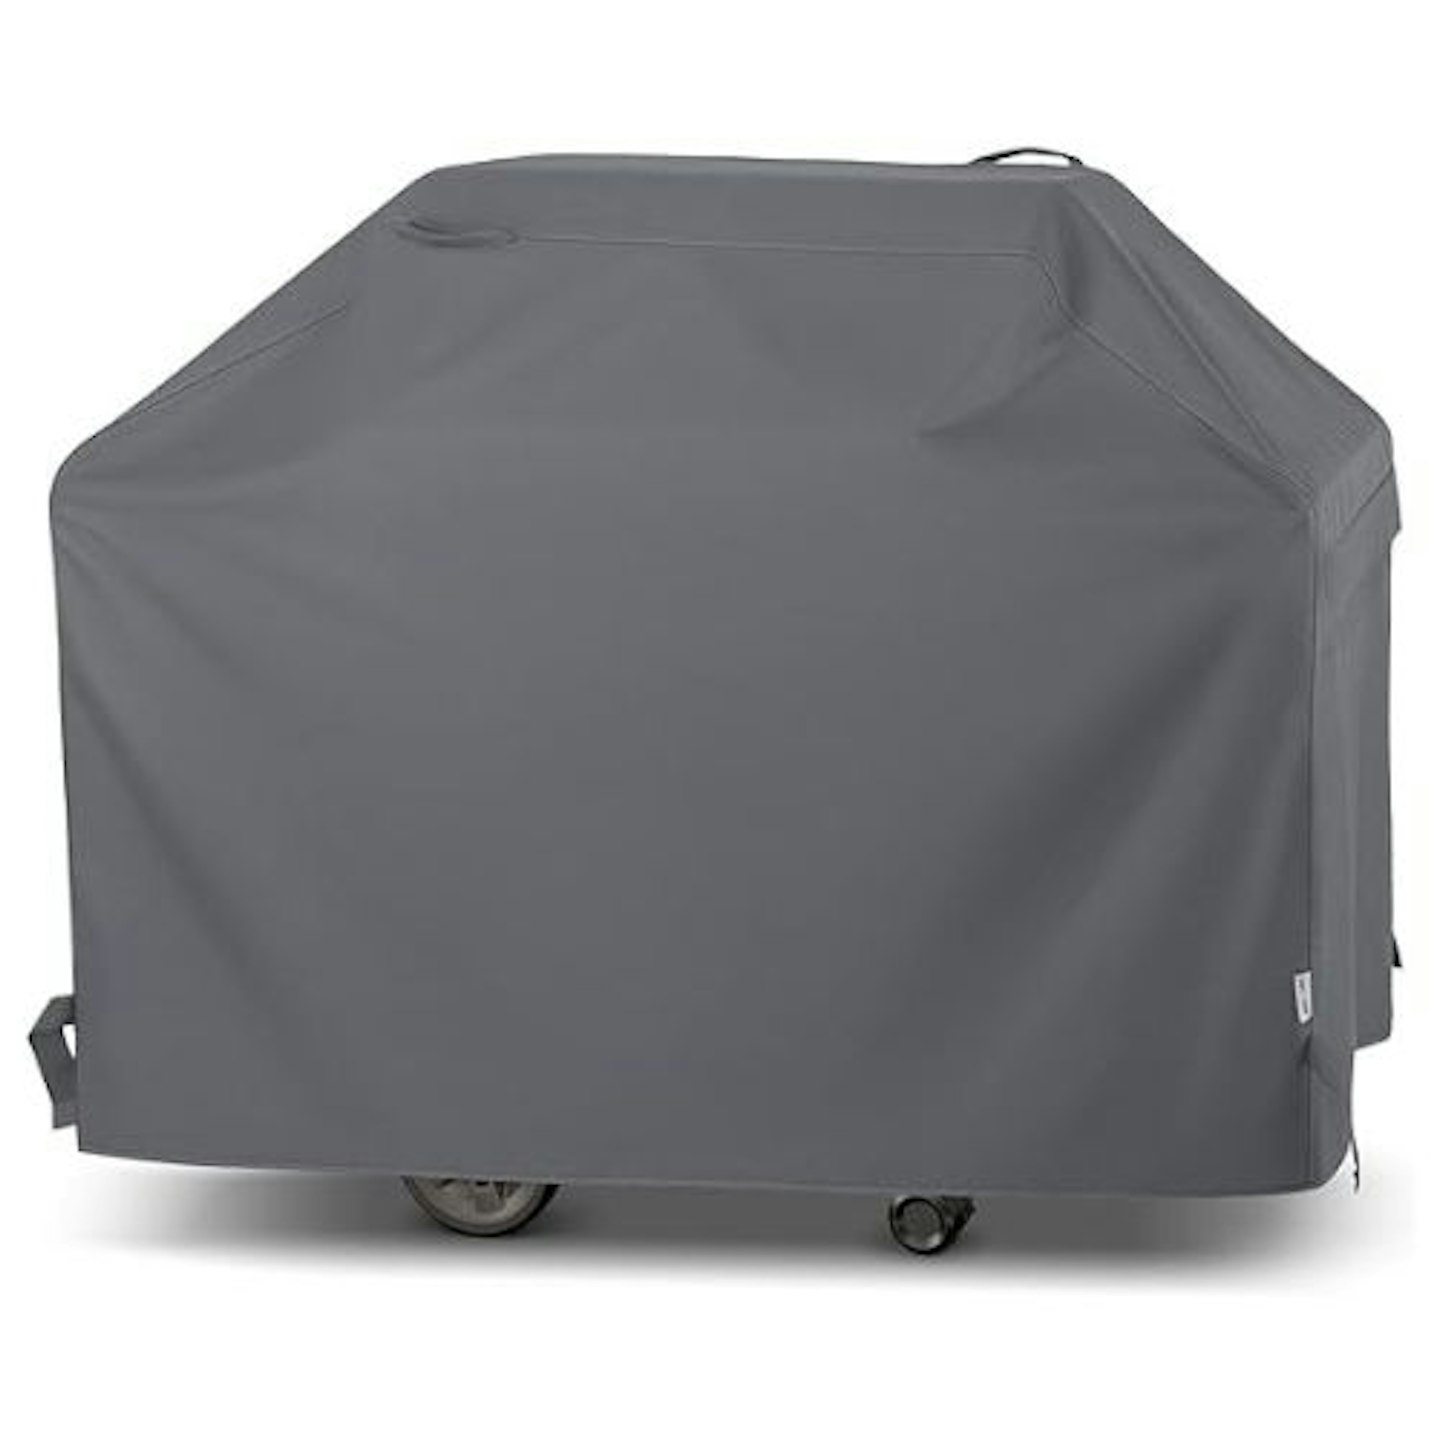 Unicook BBQ Cover Large, Heavy Duty